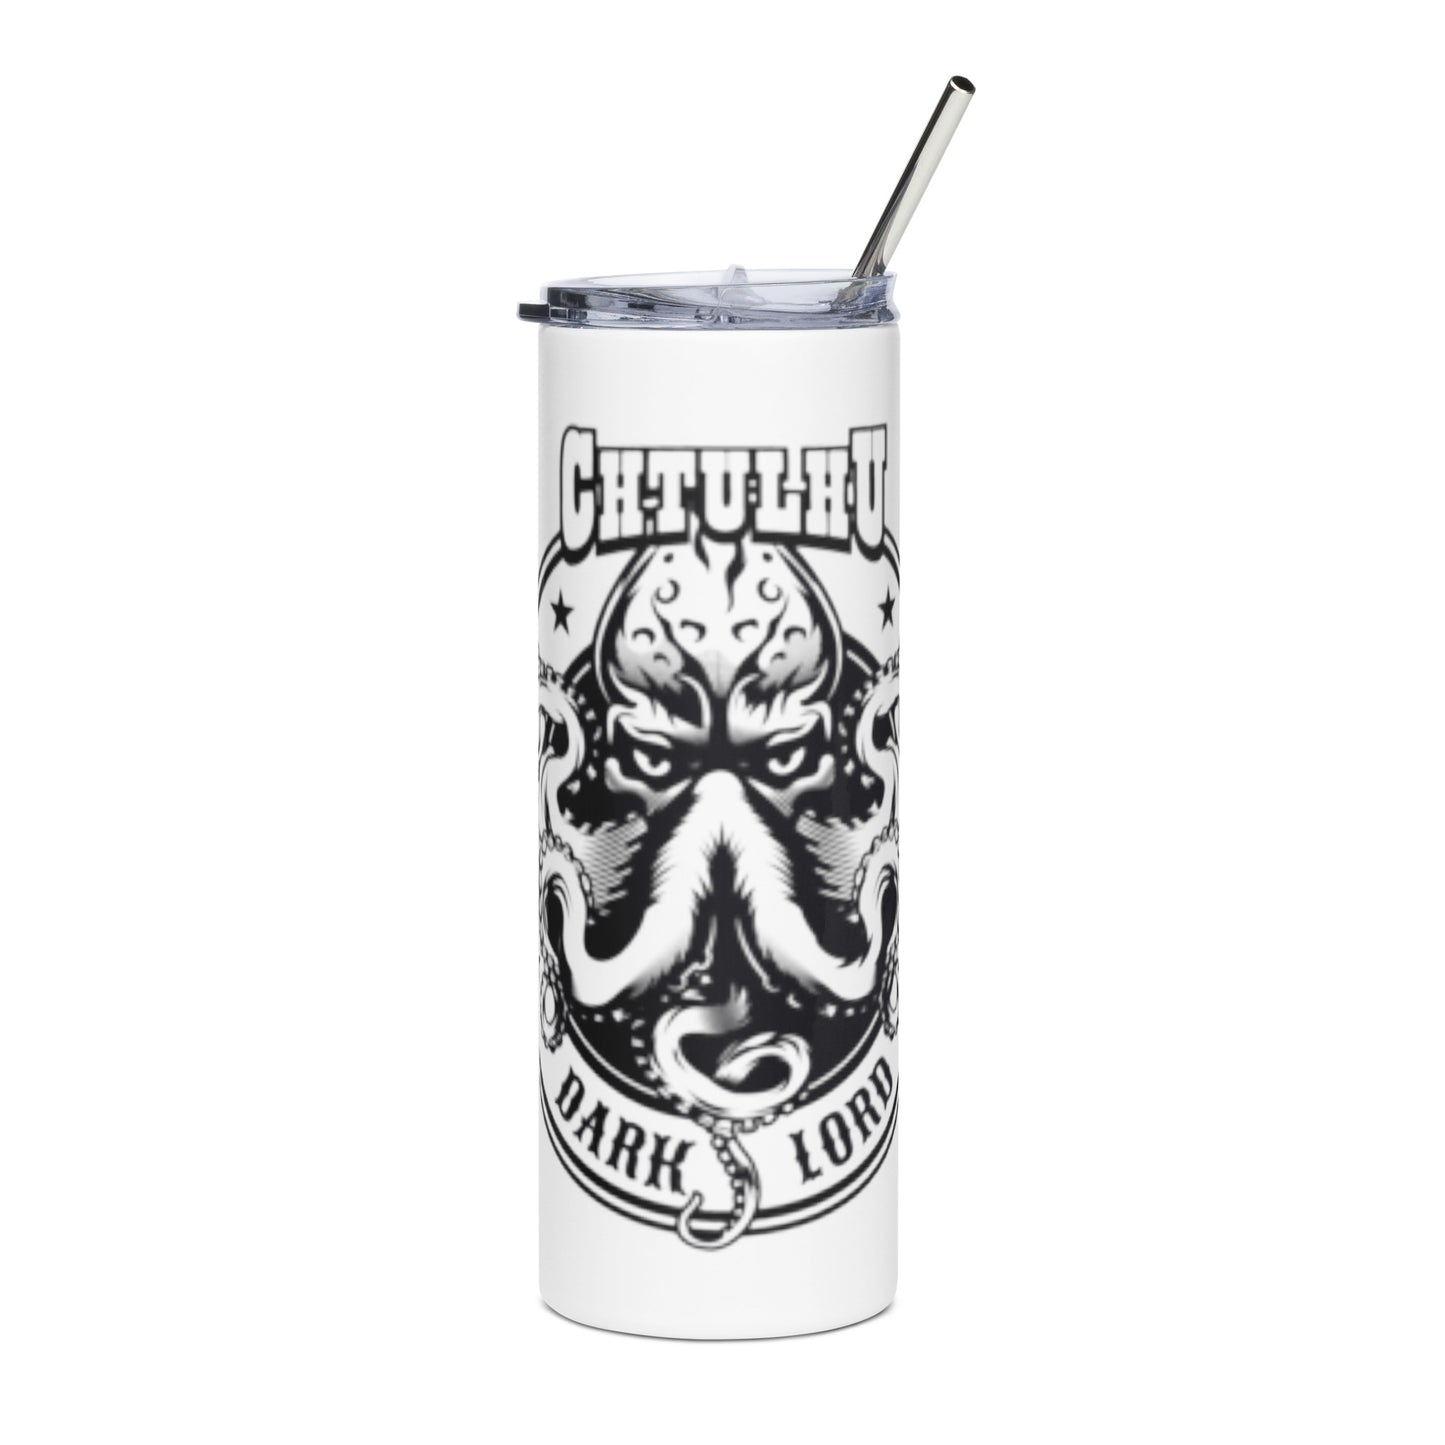 Cthulhu Stainless steel tumbler